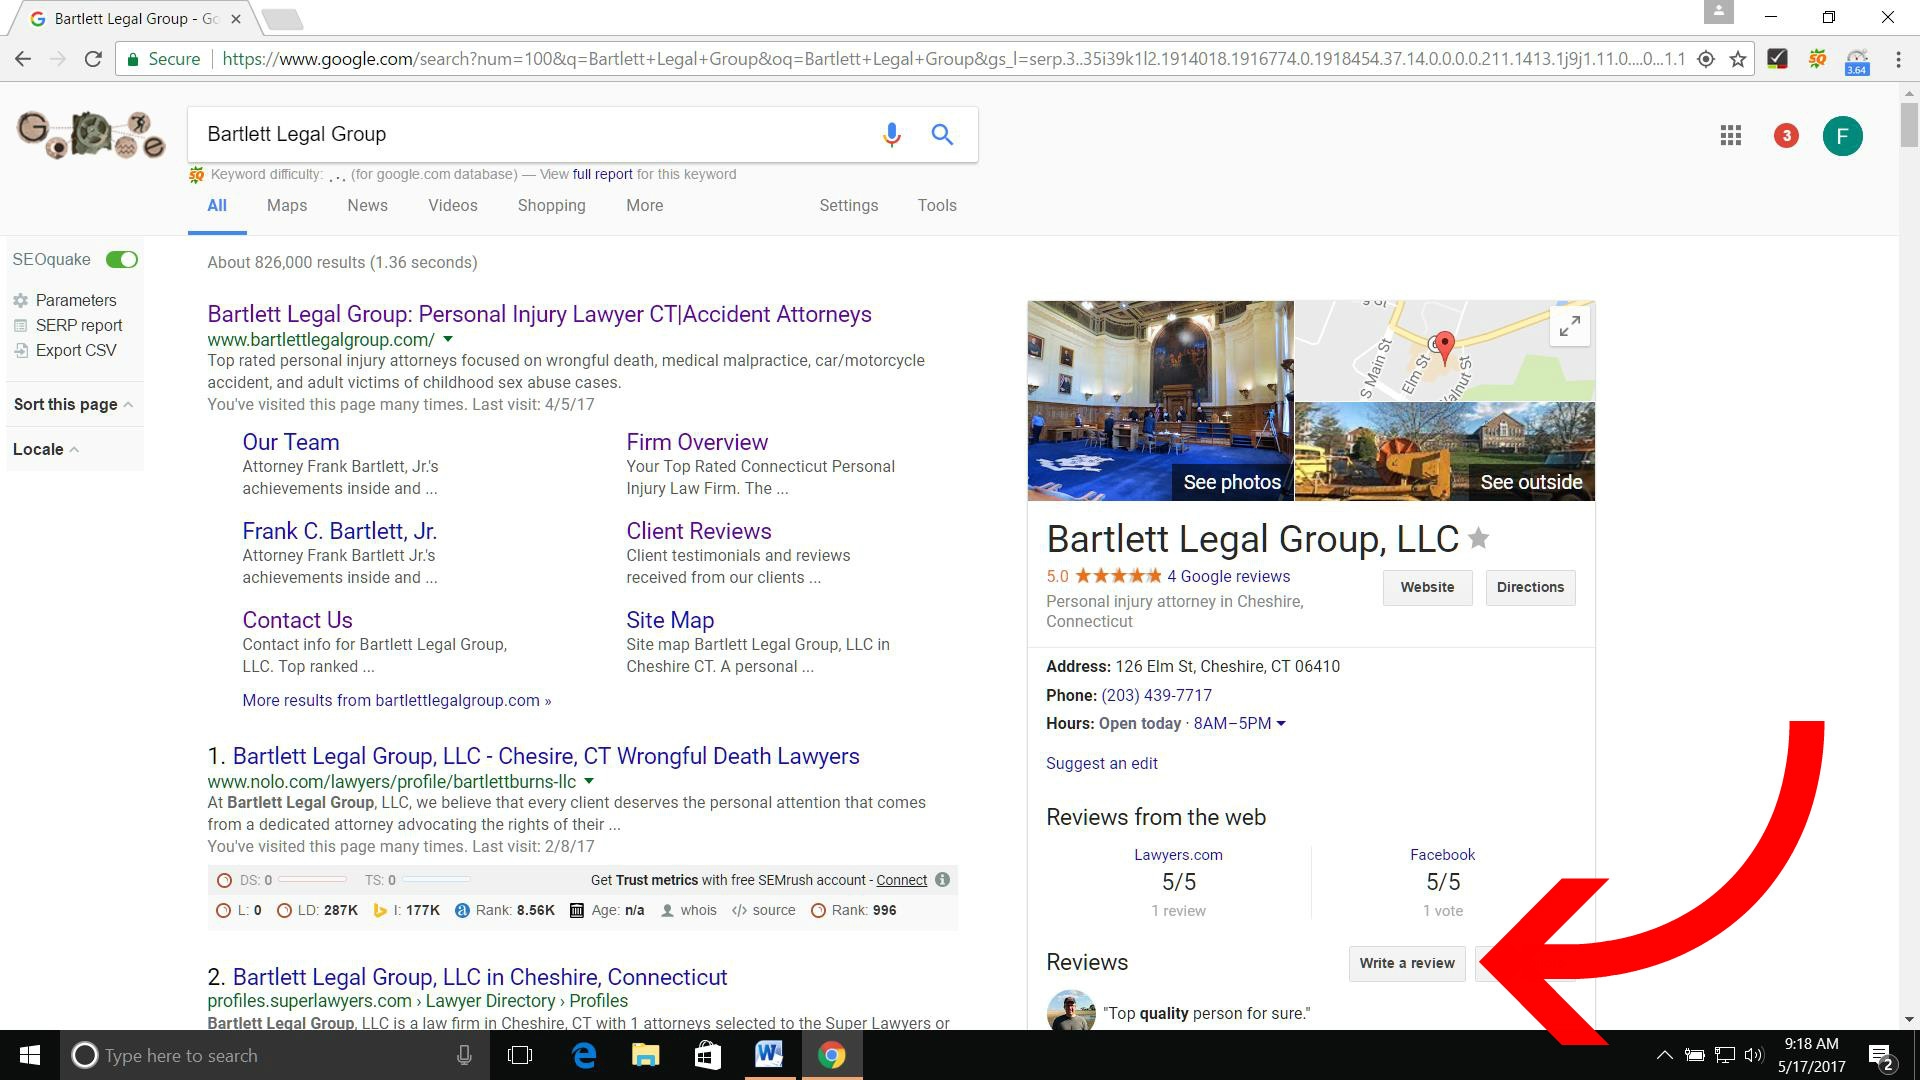 Screenshot showing how to leave a review for Bartlett Legal Group on Google